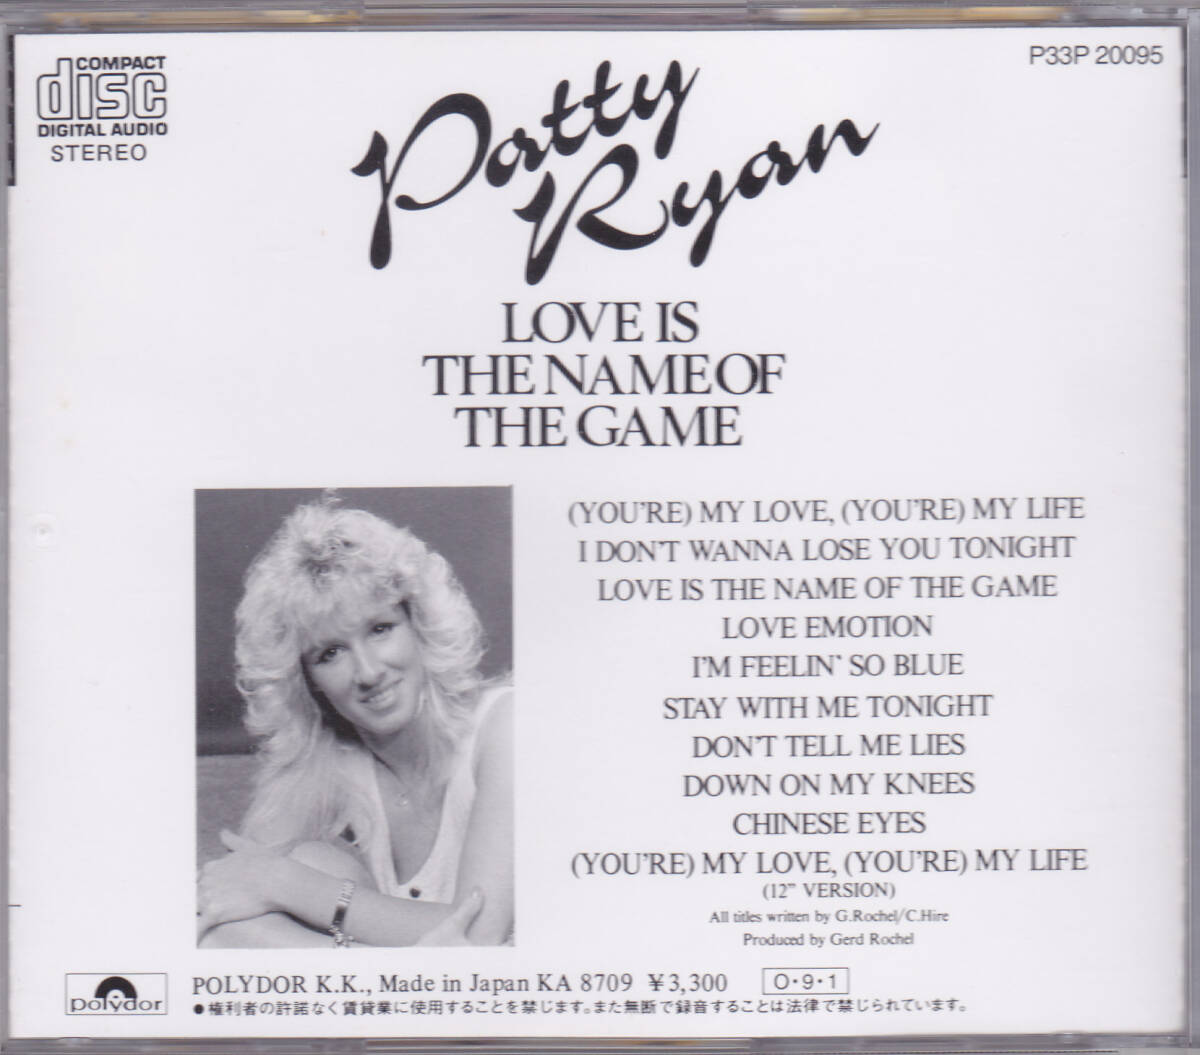 CD パティ・ライアン - ユア・マイ・ラヴ - 国内盤 P33P-20095 A1E21 LOVE IS THE NAME OF THE GAME PATTY RYANの画像2